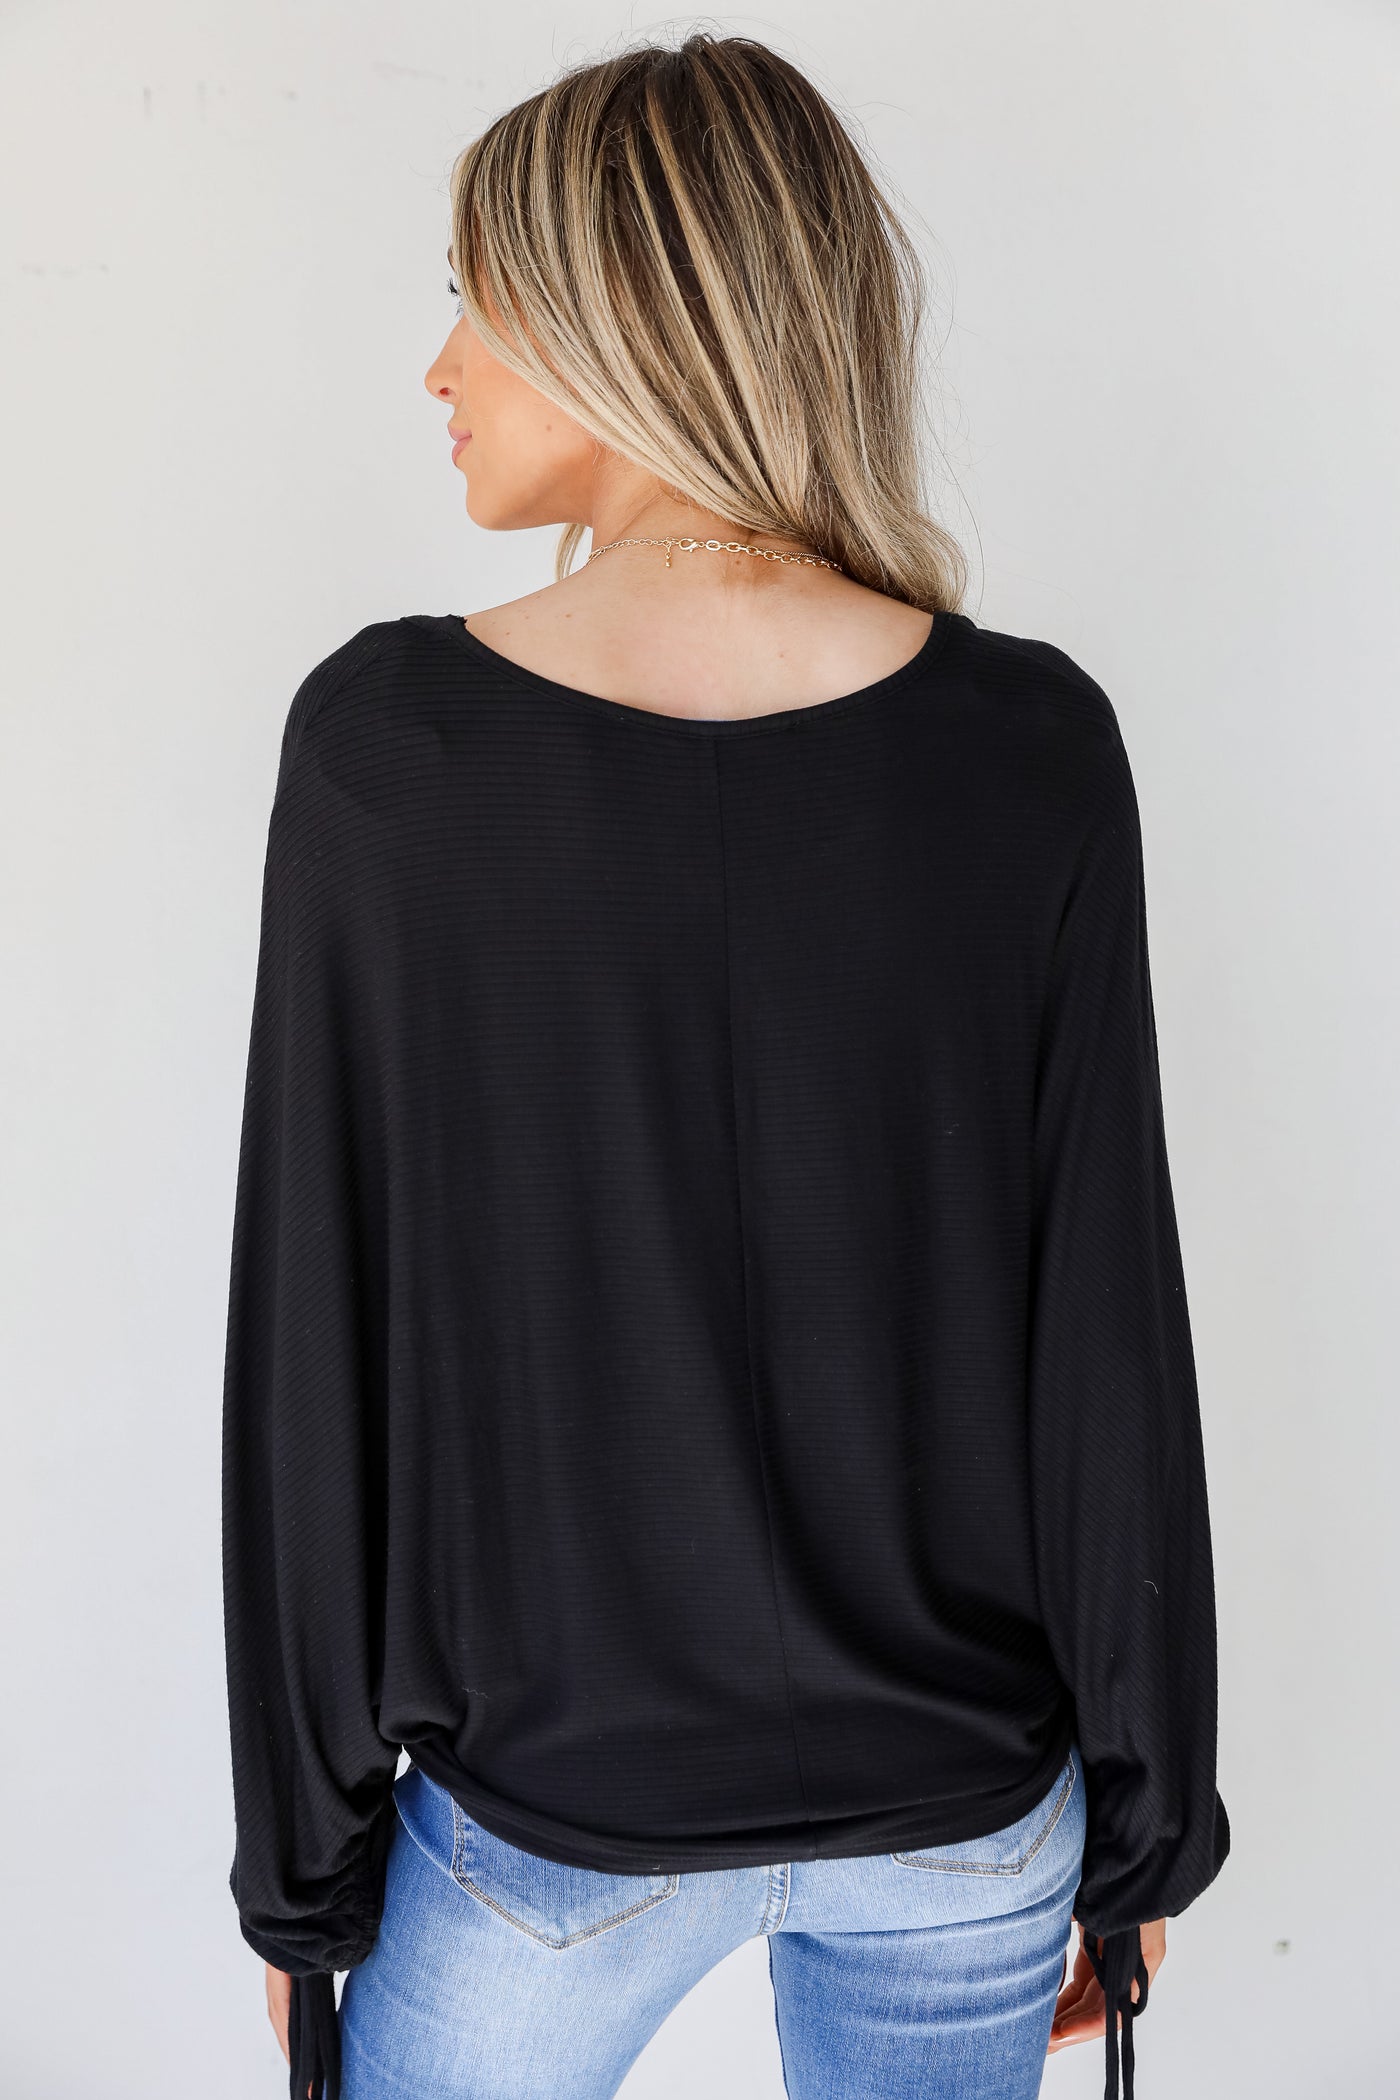 Ribbed Top in black back view